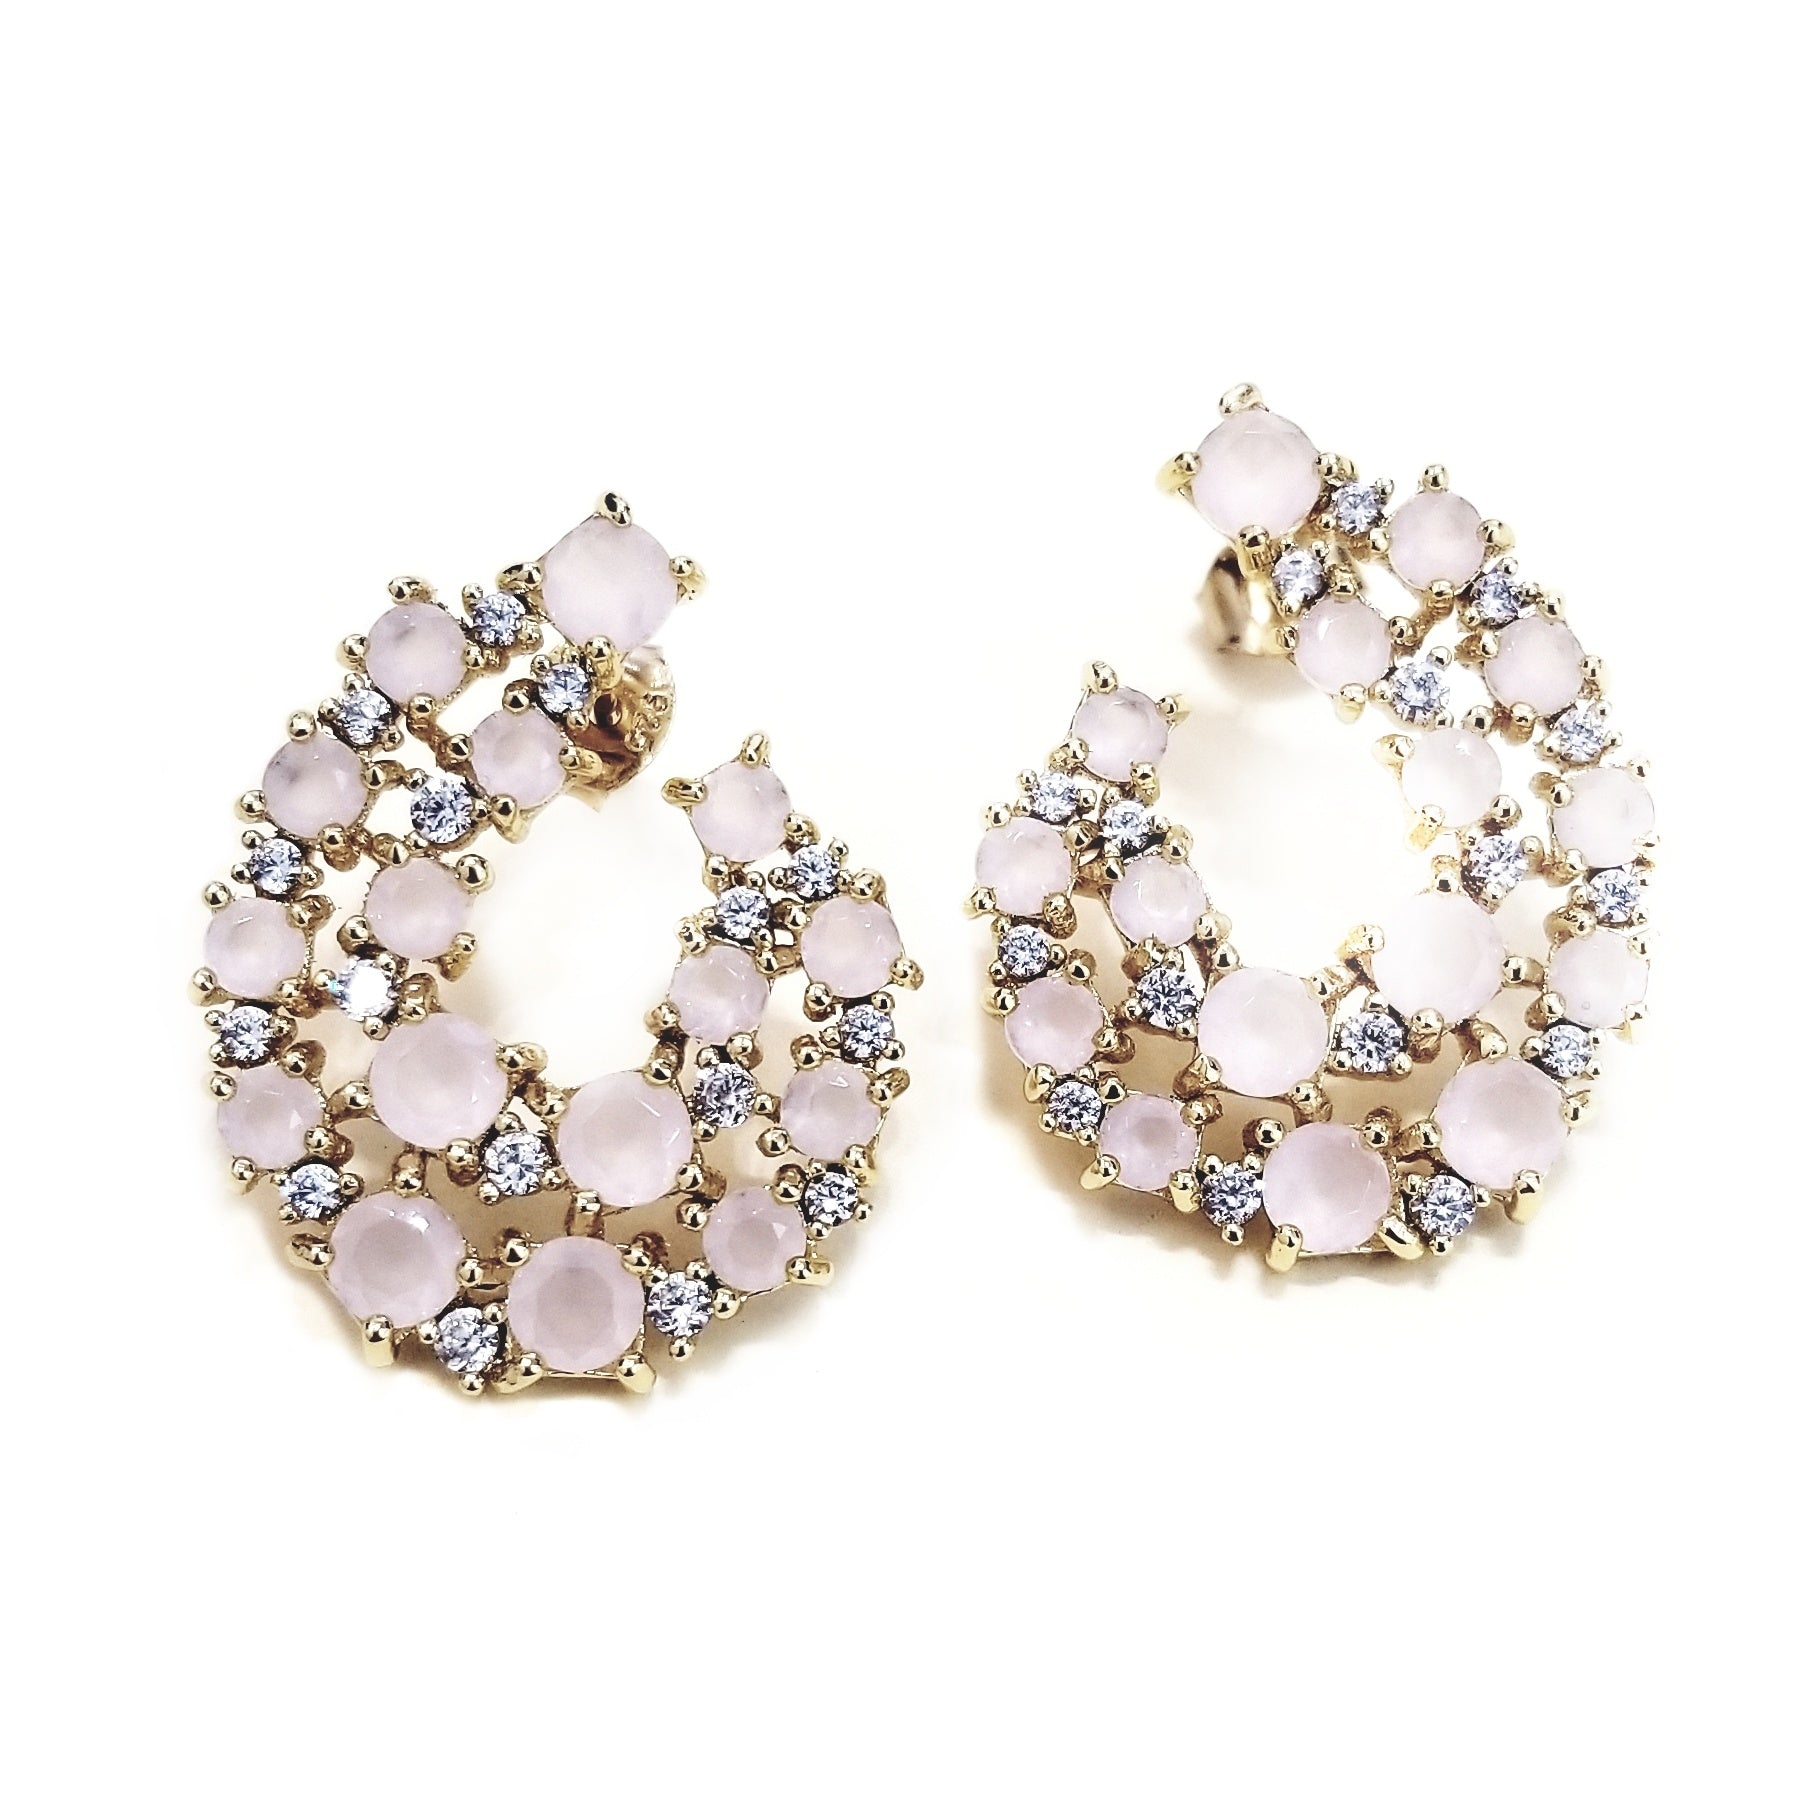 Chic crystal and zirconia earrings